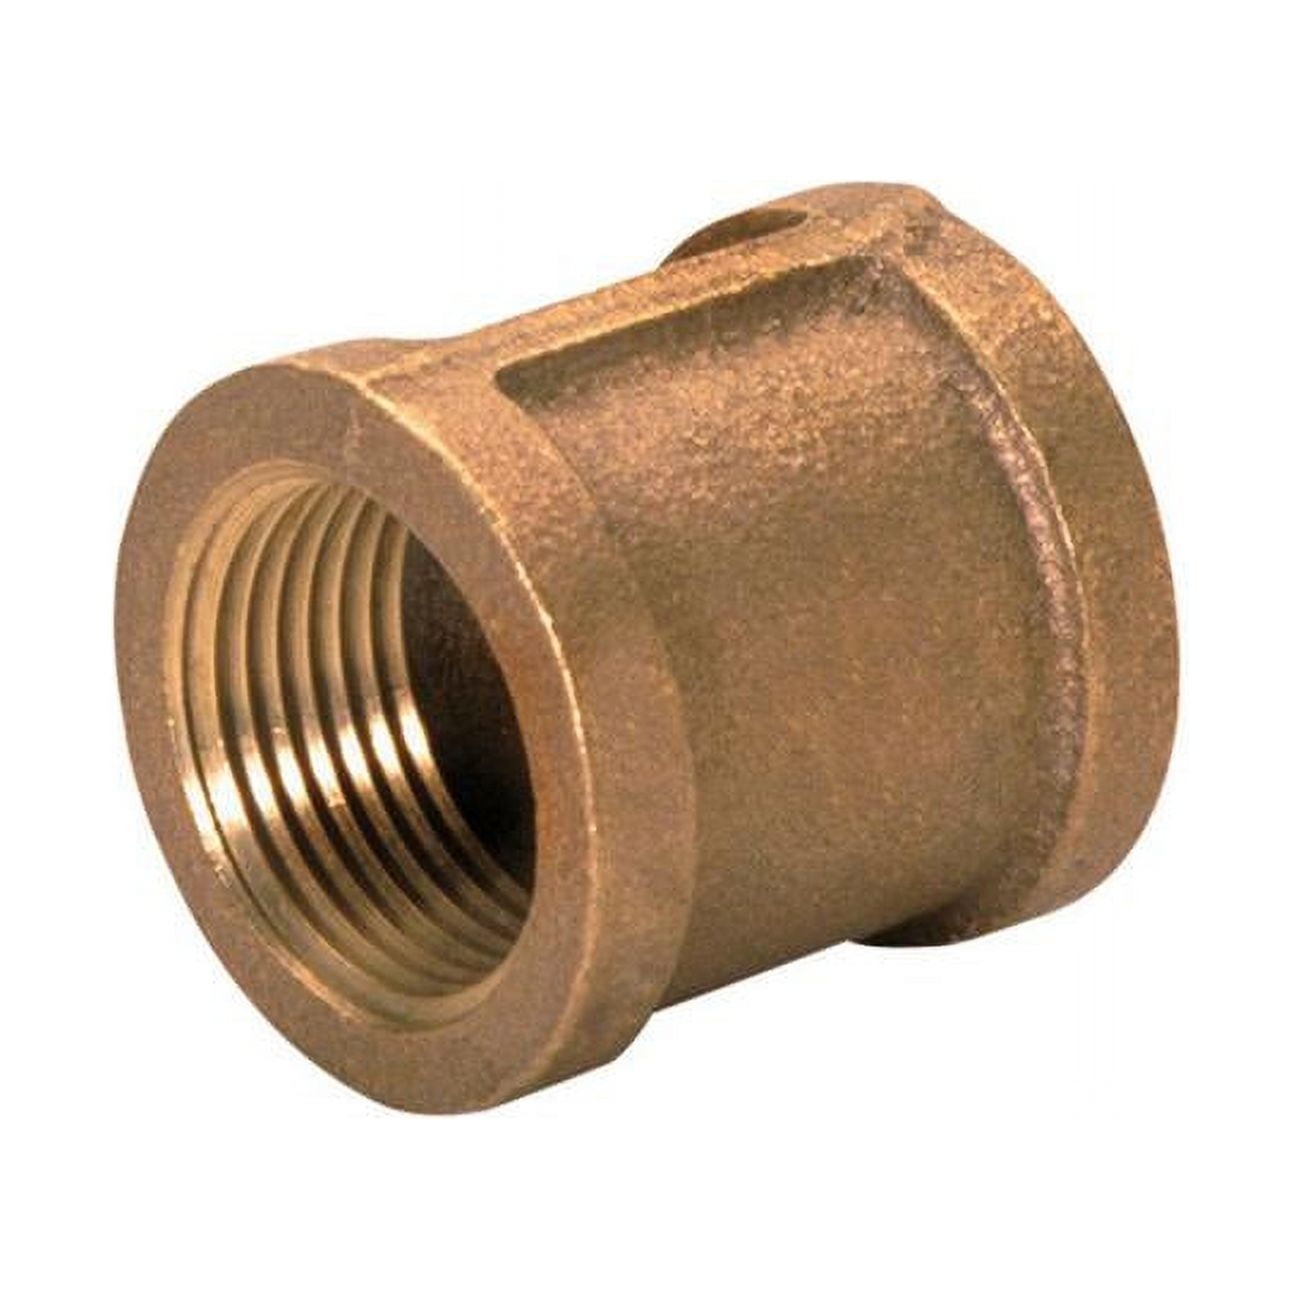 4506879 0.37 X 0.37 In. Fpt Dia. Brass Lead-free Compression Coupling- Pack Of 5